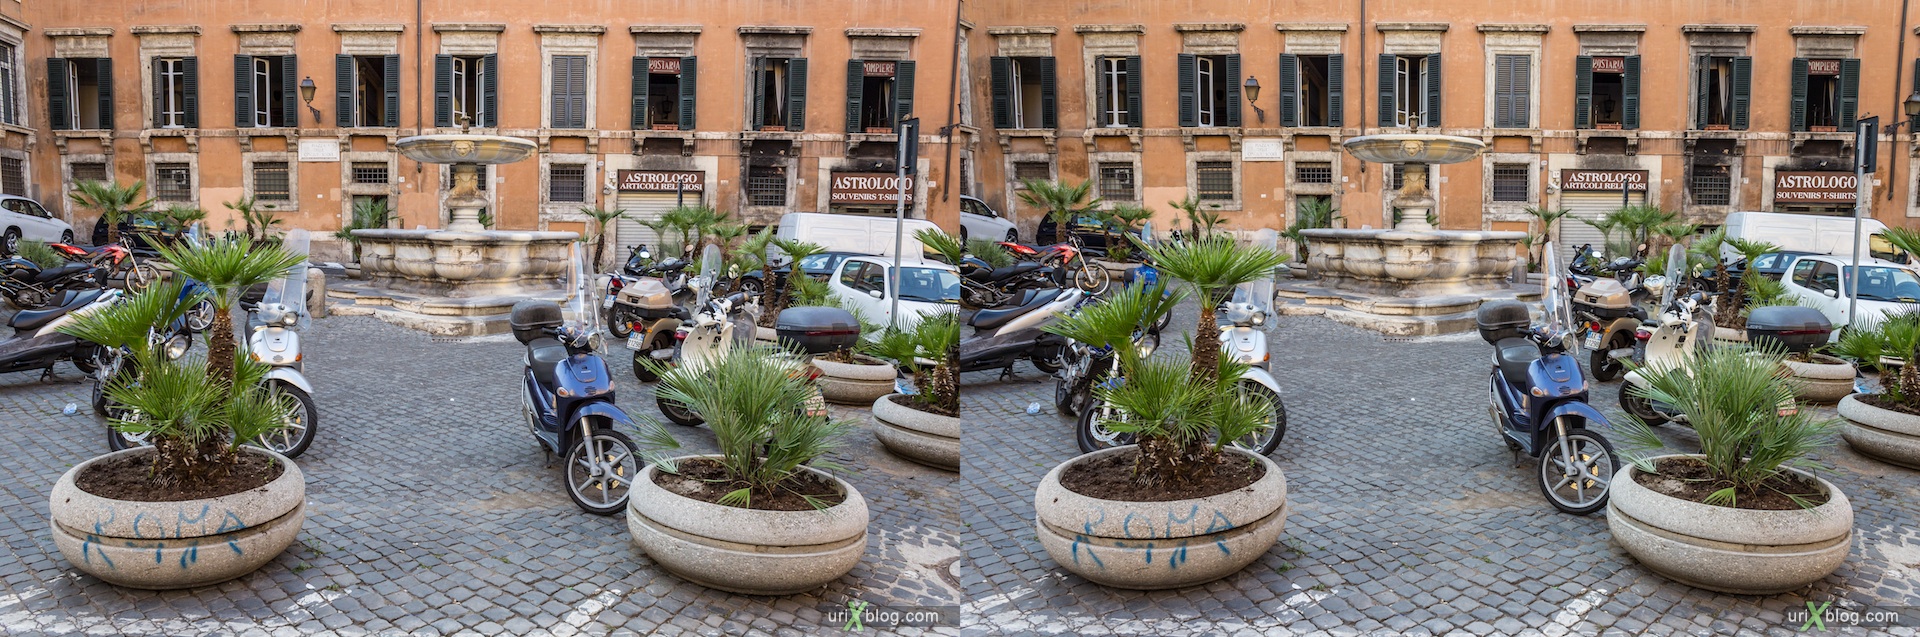 2012, Piazza delle Cinque Scole square, 3D, stereo pair, cross-eyed, crossview, cross view stereo pair